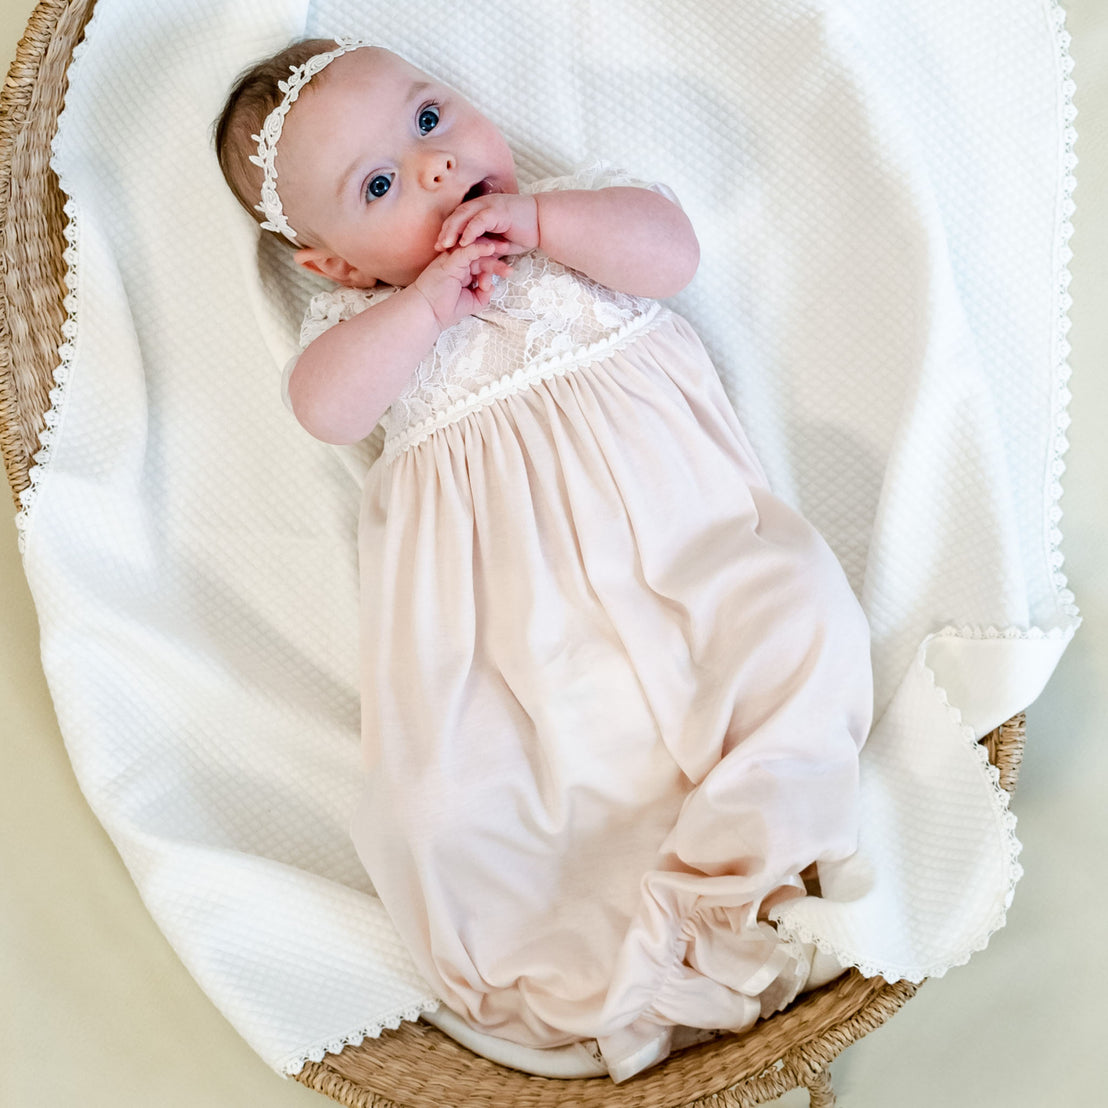 A baby wearing a Rose Layette & Bonnet lies in a woven basket, looking upwards with hands clasped near the mouth, on a soft beige background.